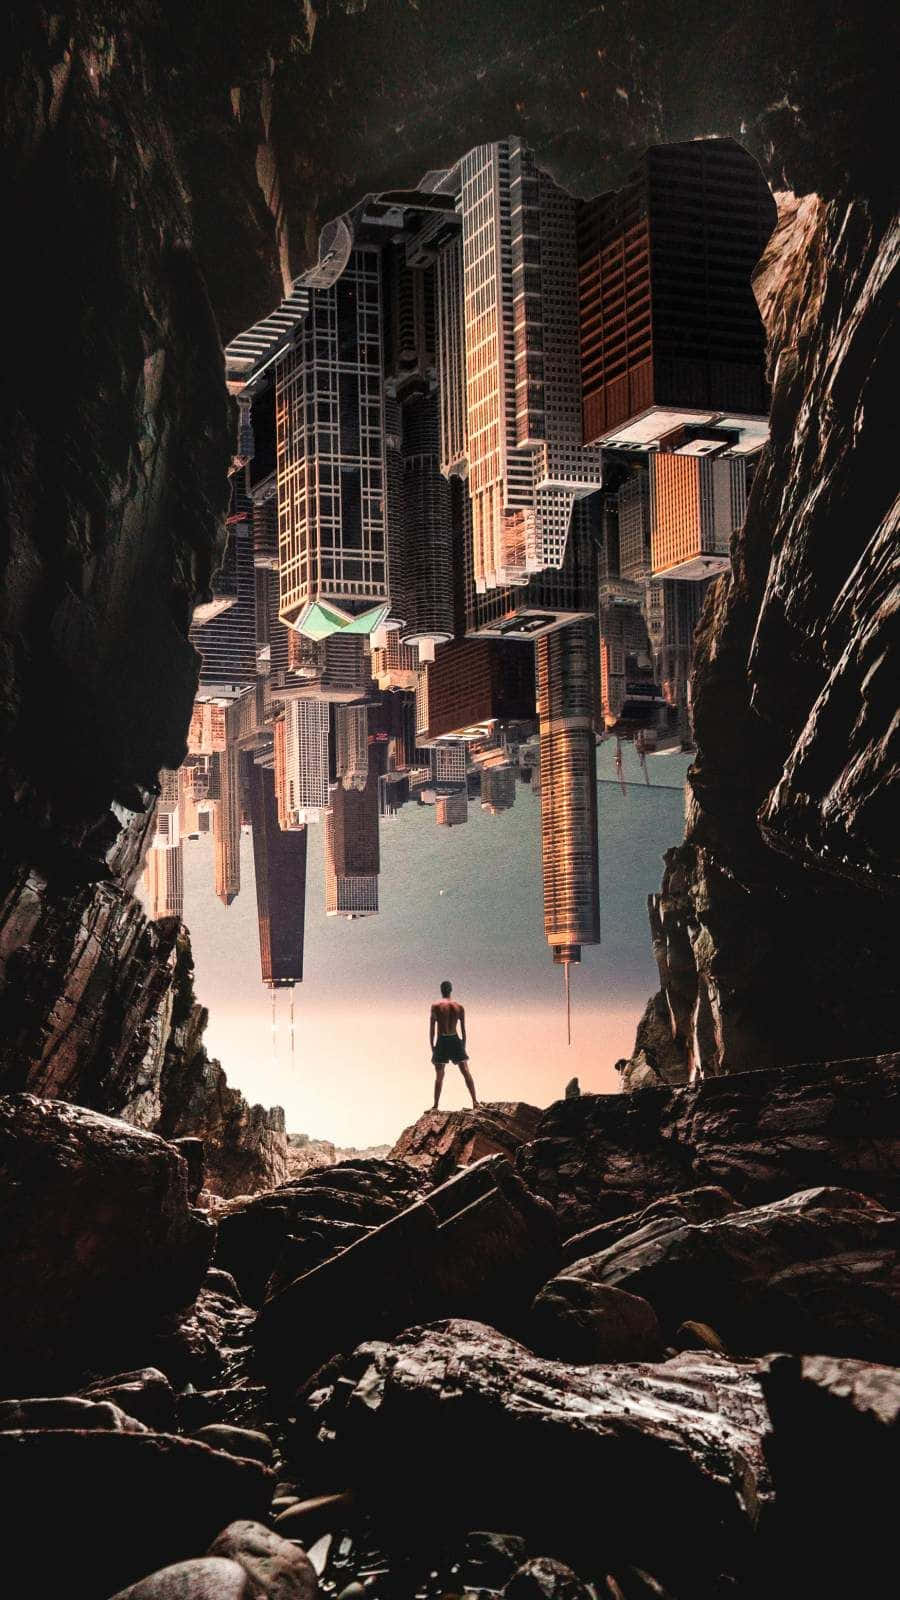 A Man Standing In A Cave With A City In The Background